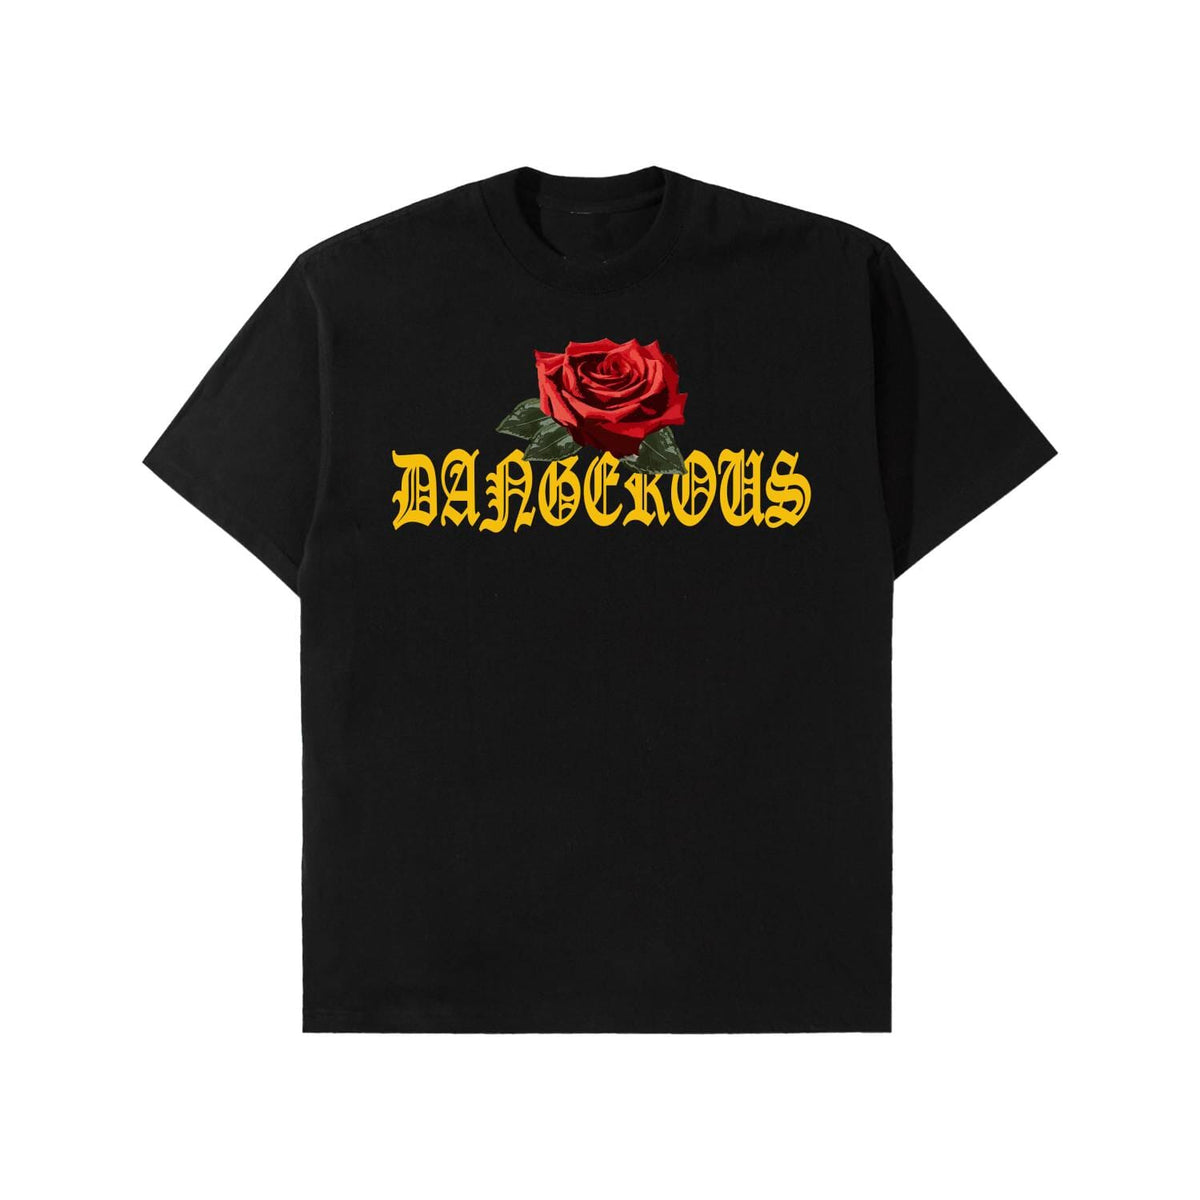 DANGEROUS ROSE TEE - BLACK SHIRT Yours Truly Clothing